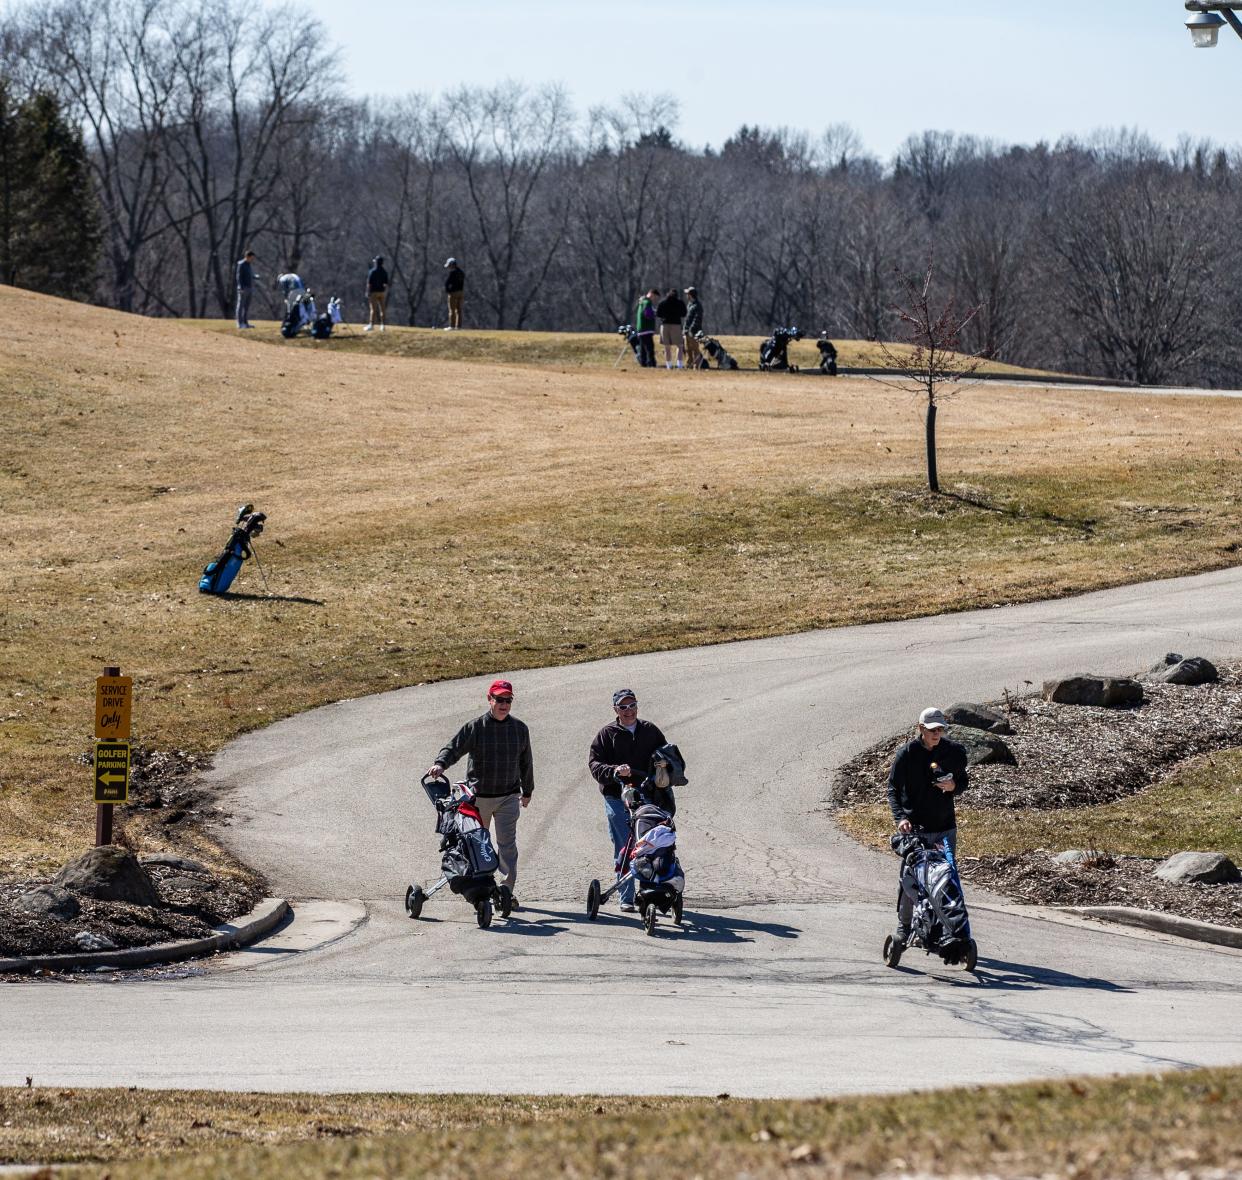 Whitnall Park Golf Course in Franklin bustles with activity on Saturday, March 23, 2019. Warm sunny weather lured many enthusiasts outside to enjoy the game.